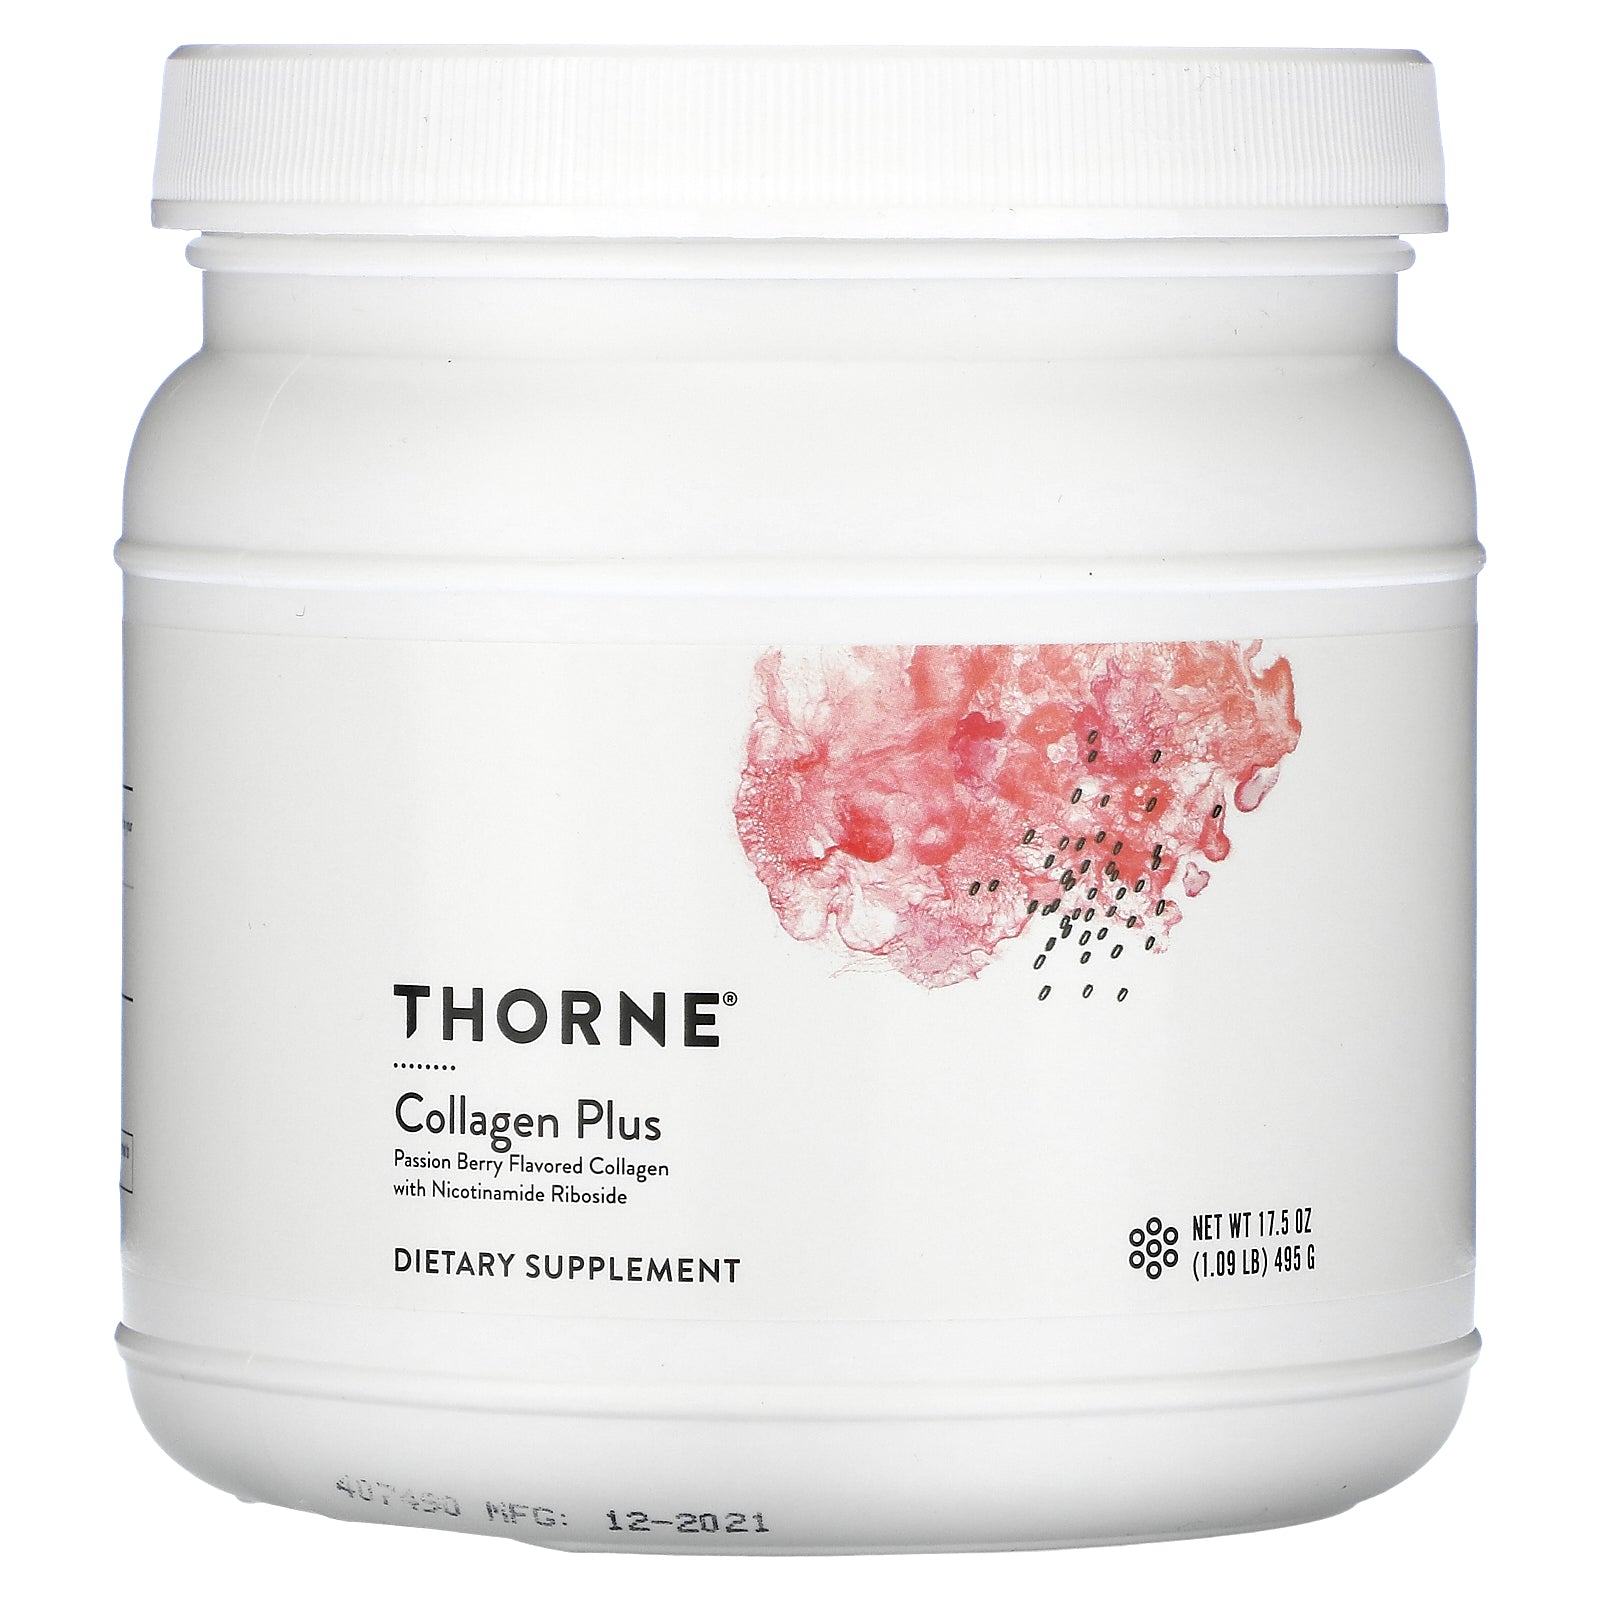 Thorne Research, Collagen Plus, Passion Berry